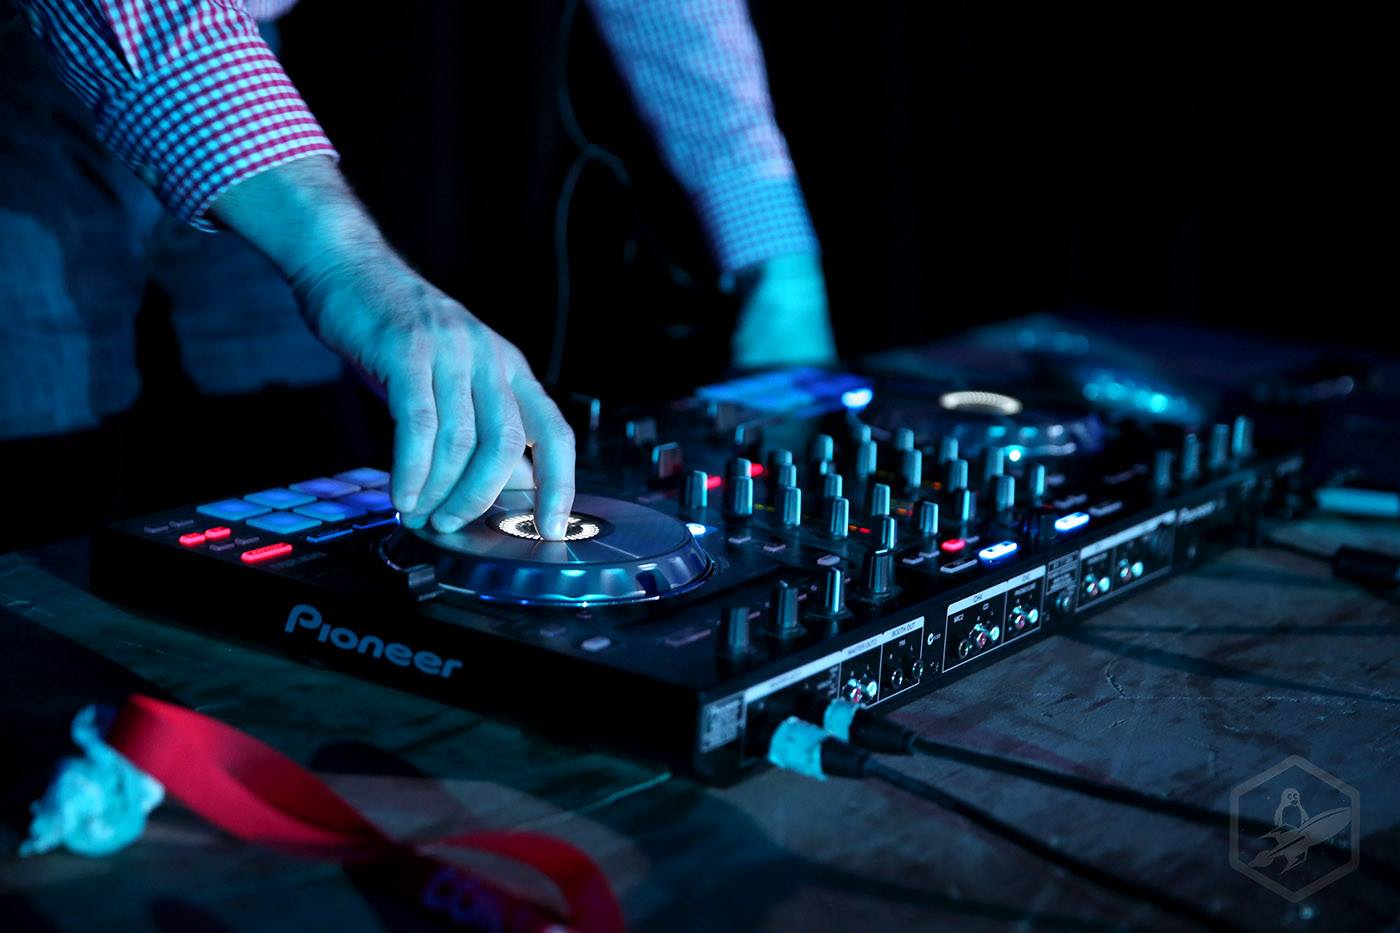 Hands on a DJ turntable